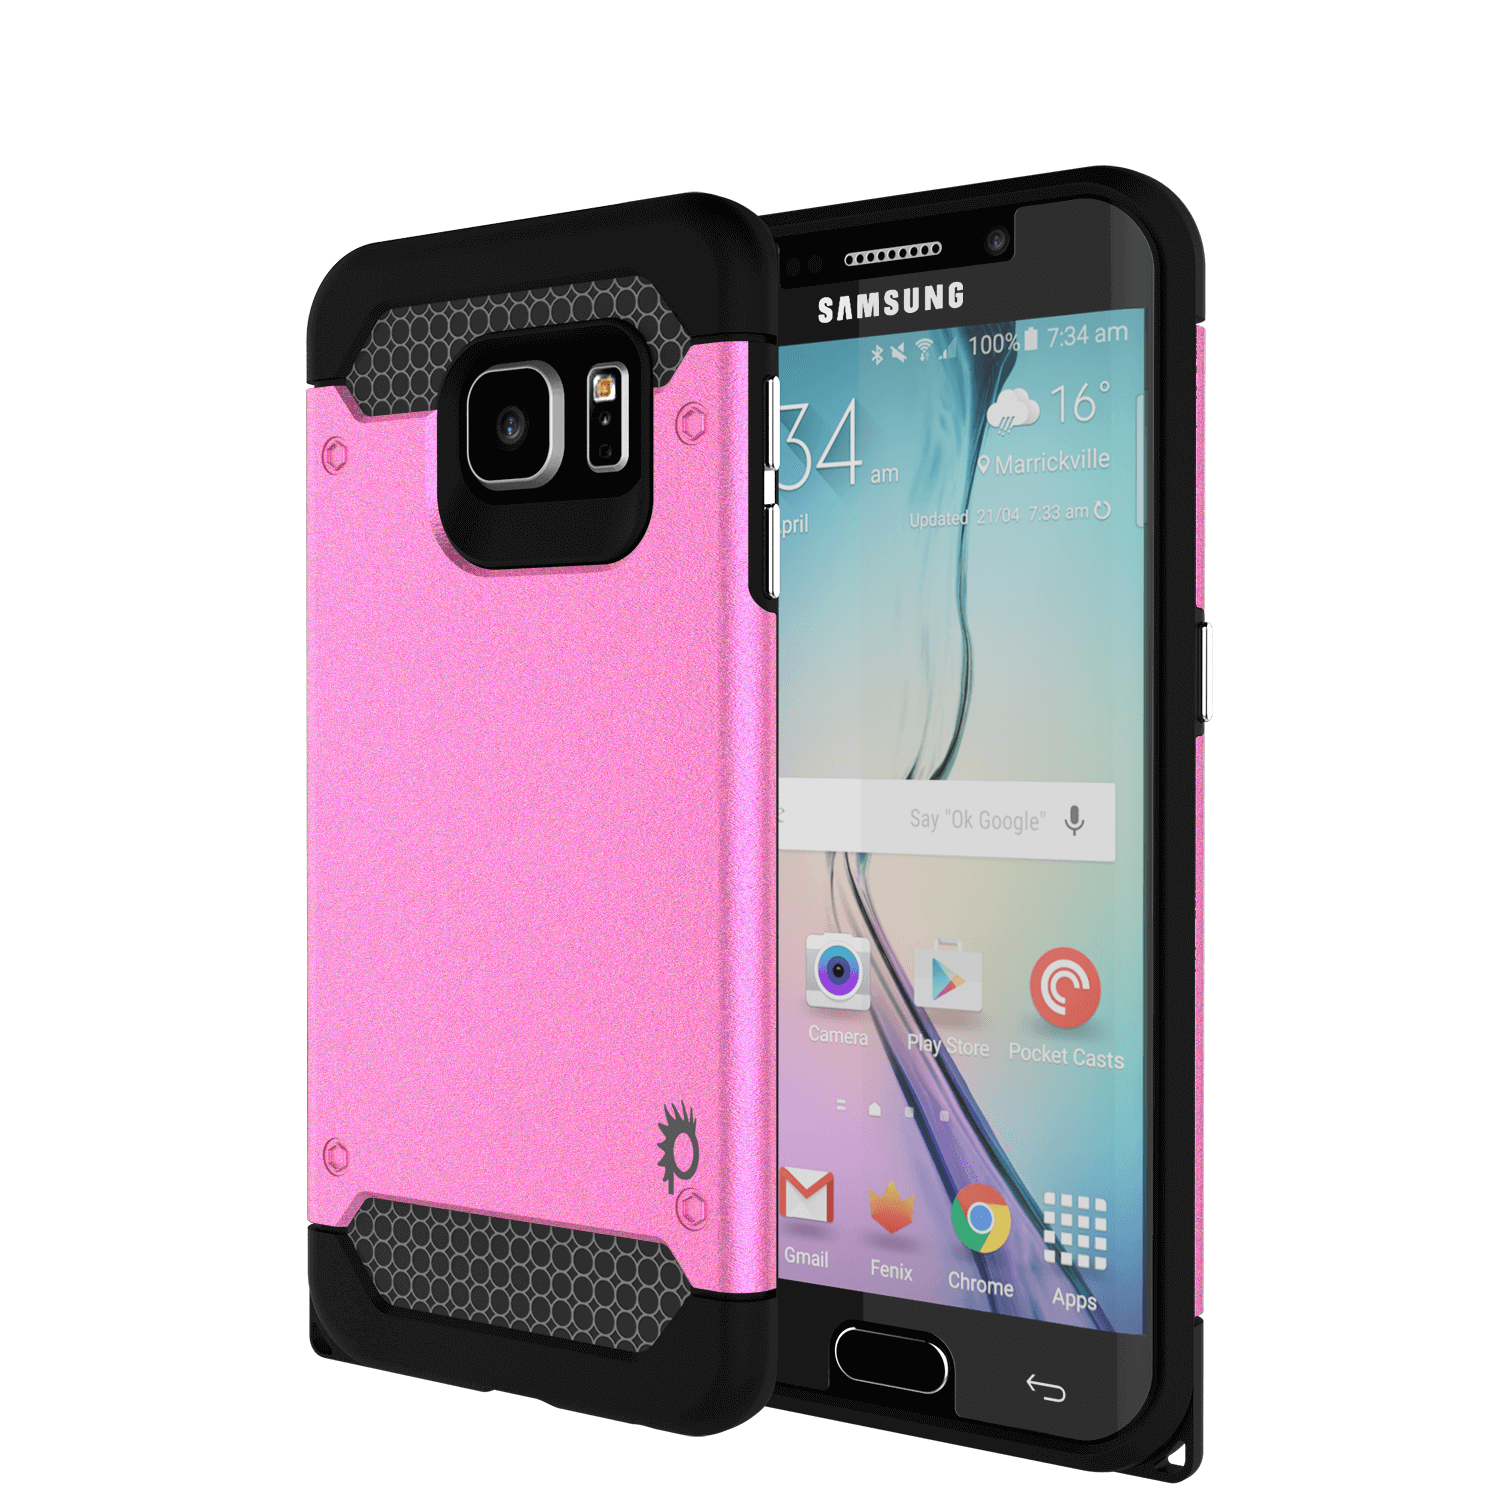 Galaxy s6 EDGE Plus Case PunkCase Galactic Pink Series Slim Protective Armor Soft Cover Case w/ Tempered Glass Protector Lifetime Warranty